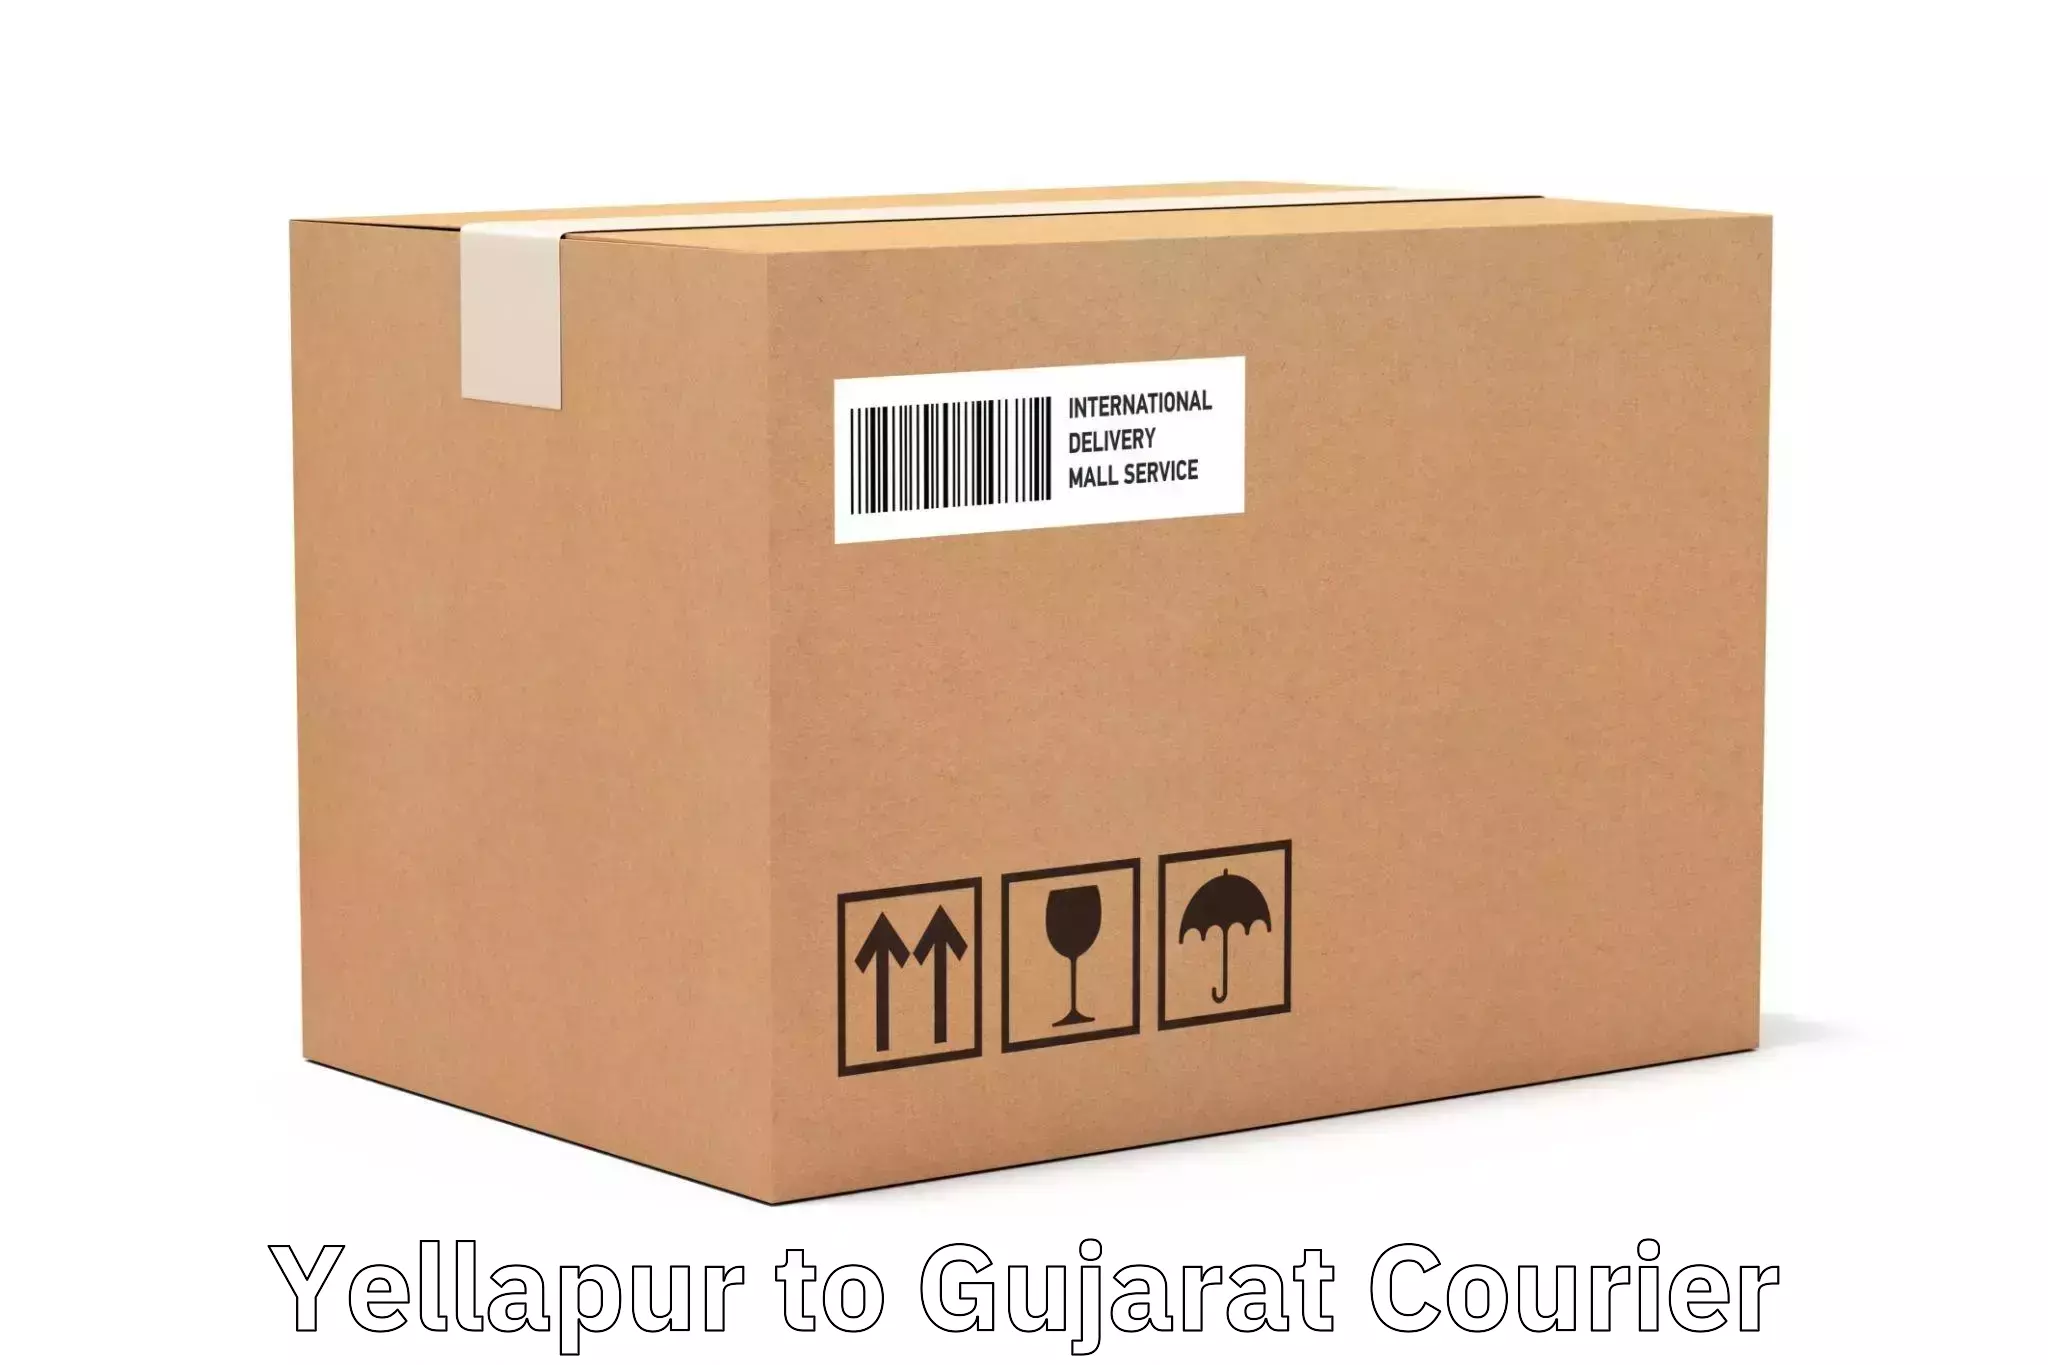 User-friendly delivery service Yellapur to Gujarat